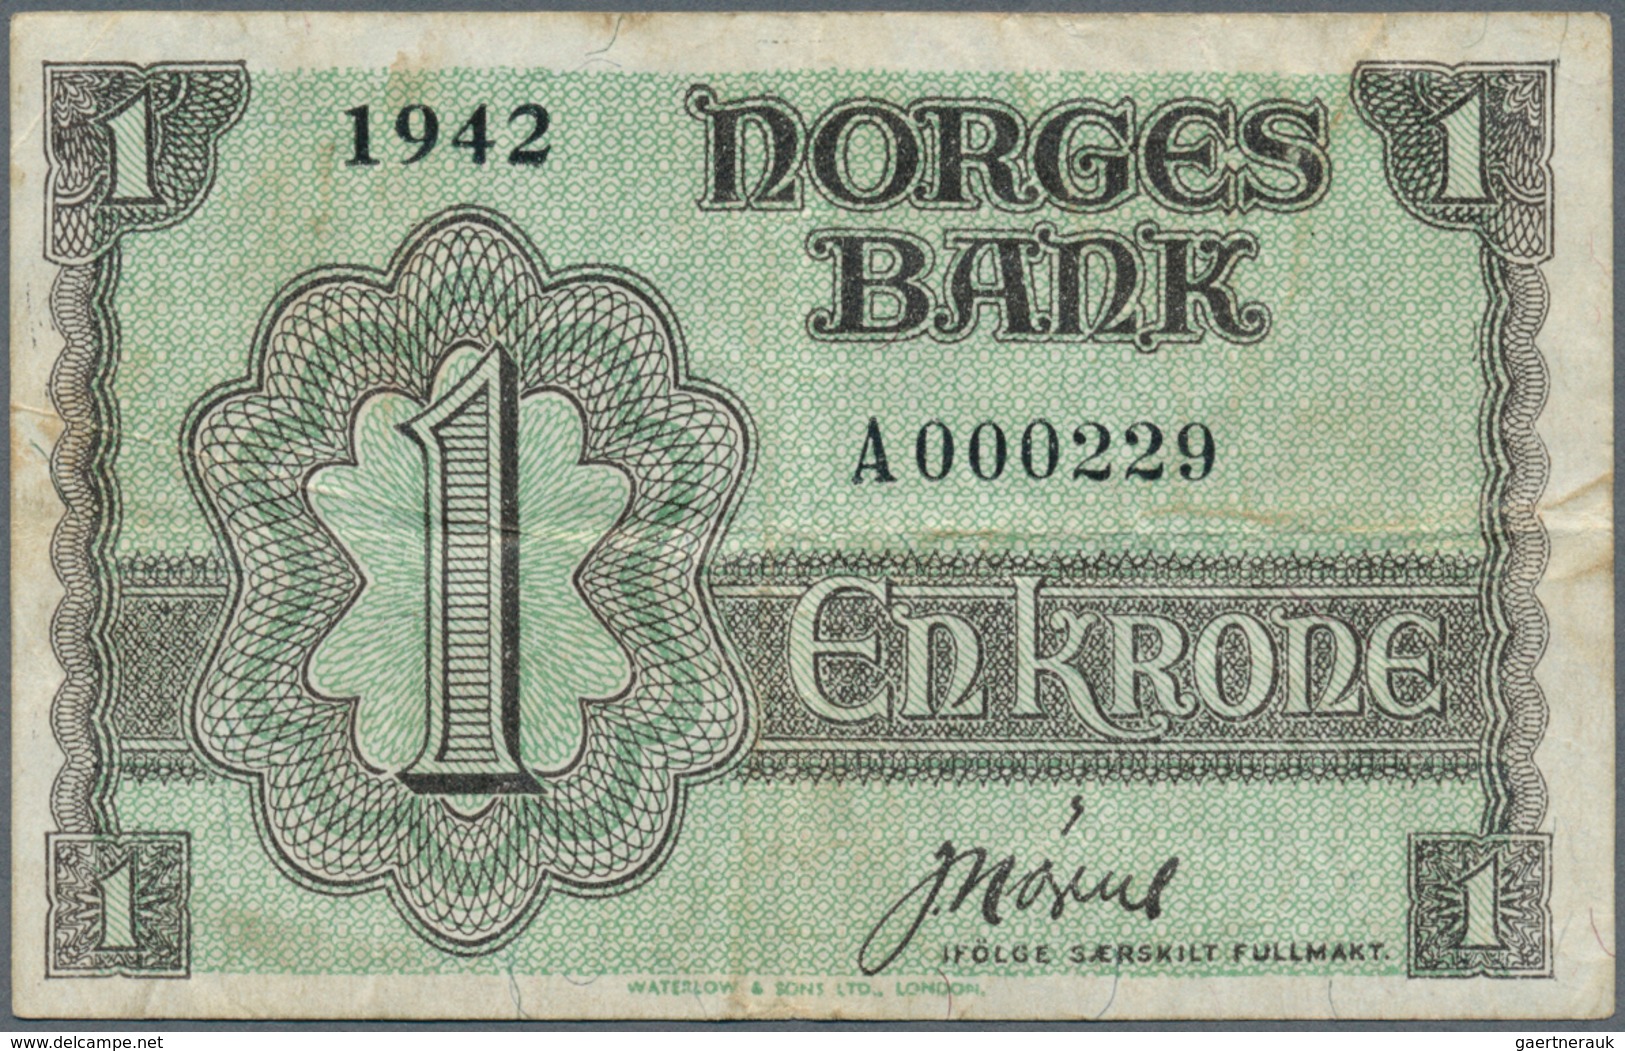 Norway / Norwegen: 1 Krone 1942 P. 17a With Very Low Serial Number #A000229, So This Note Was The 22 - Norvegia